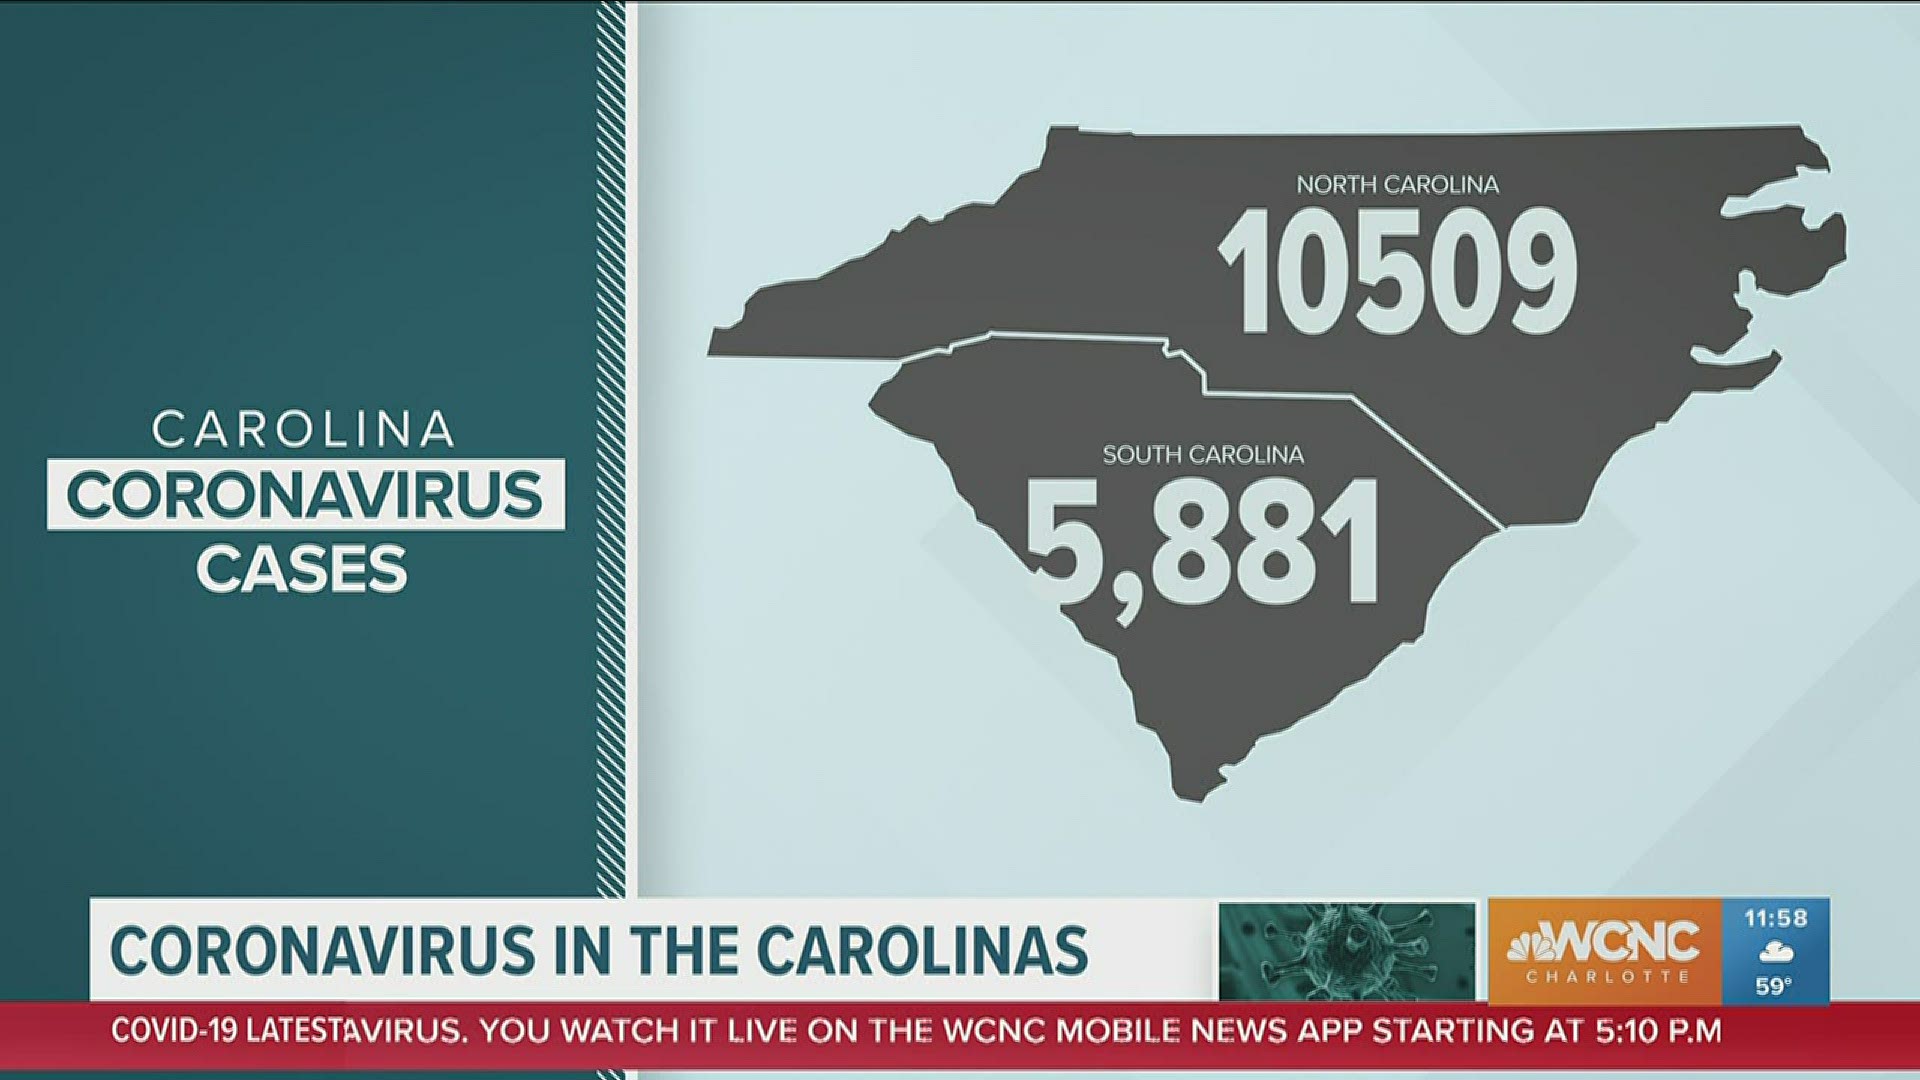 North Carolina has surpassed 10,000 confirmed cases of coronavirus with nearly 400 deaths.